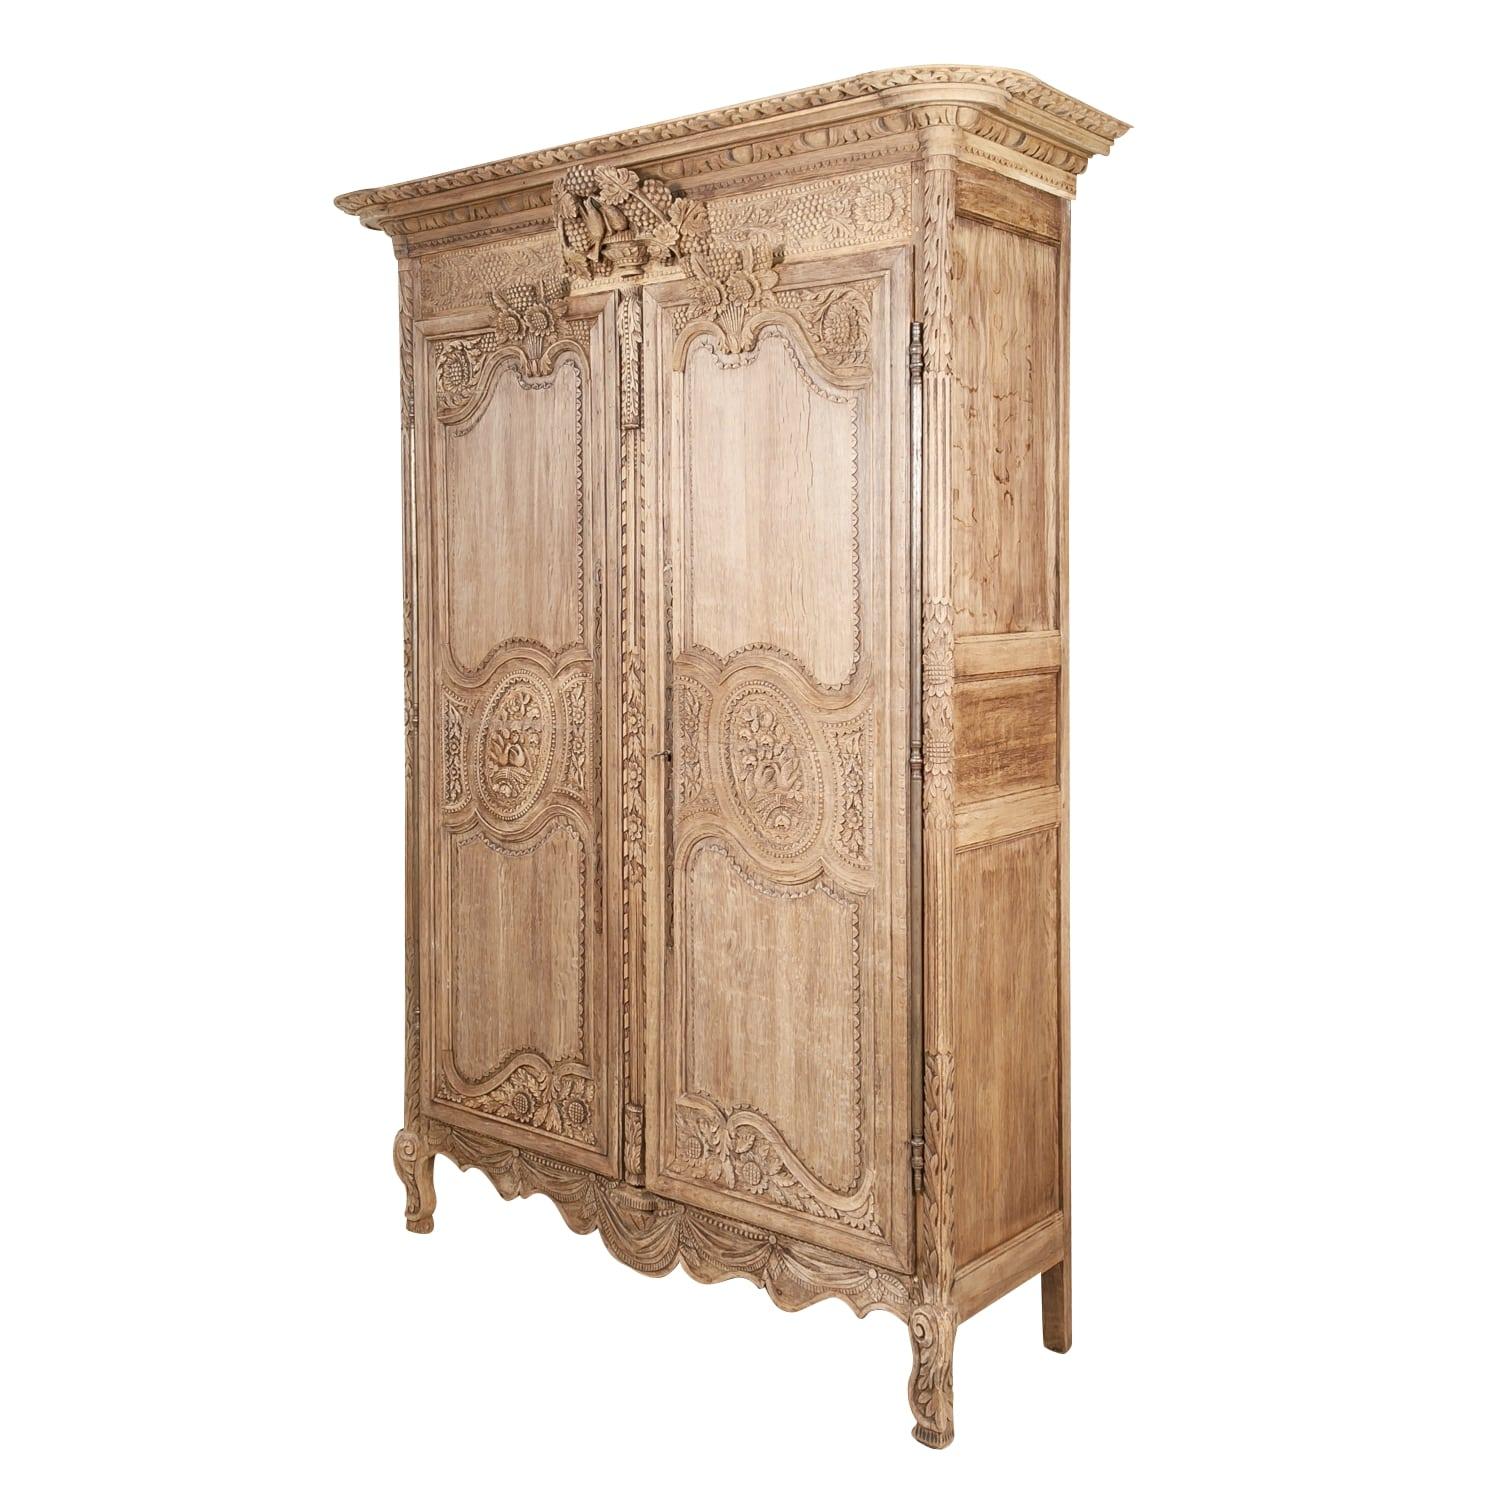 French Country Louis XV style bleached armoire de mariage, circa early 1800s, handcrafted of French oak near Saint-Lô, a commune in the Normandy region. This beautiful 19th century wedding or marriage armoire features symbolic carvings typical of